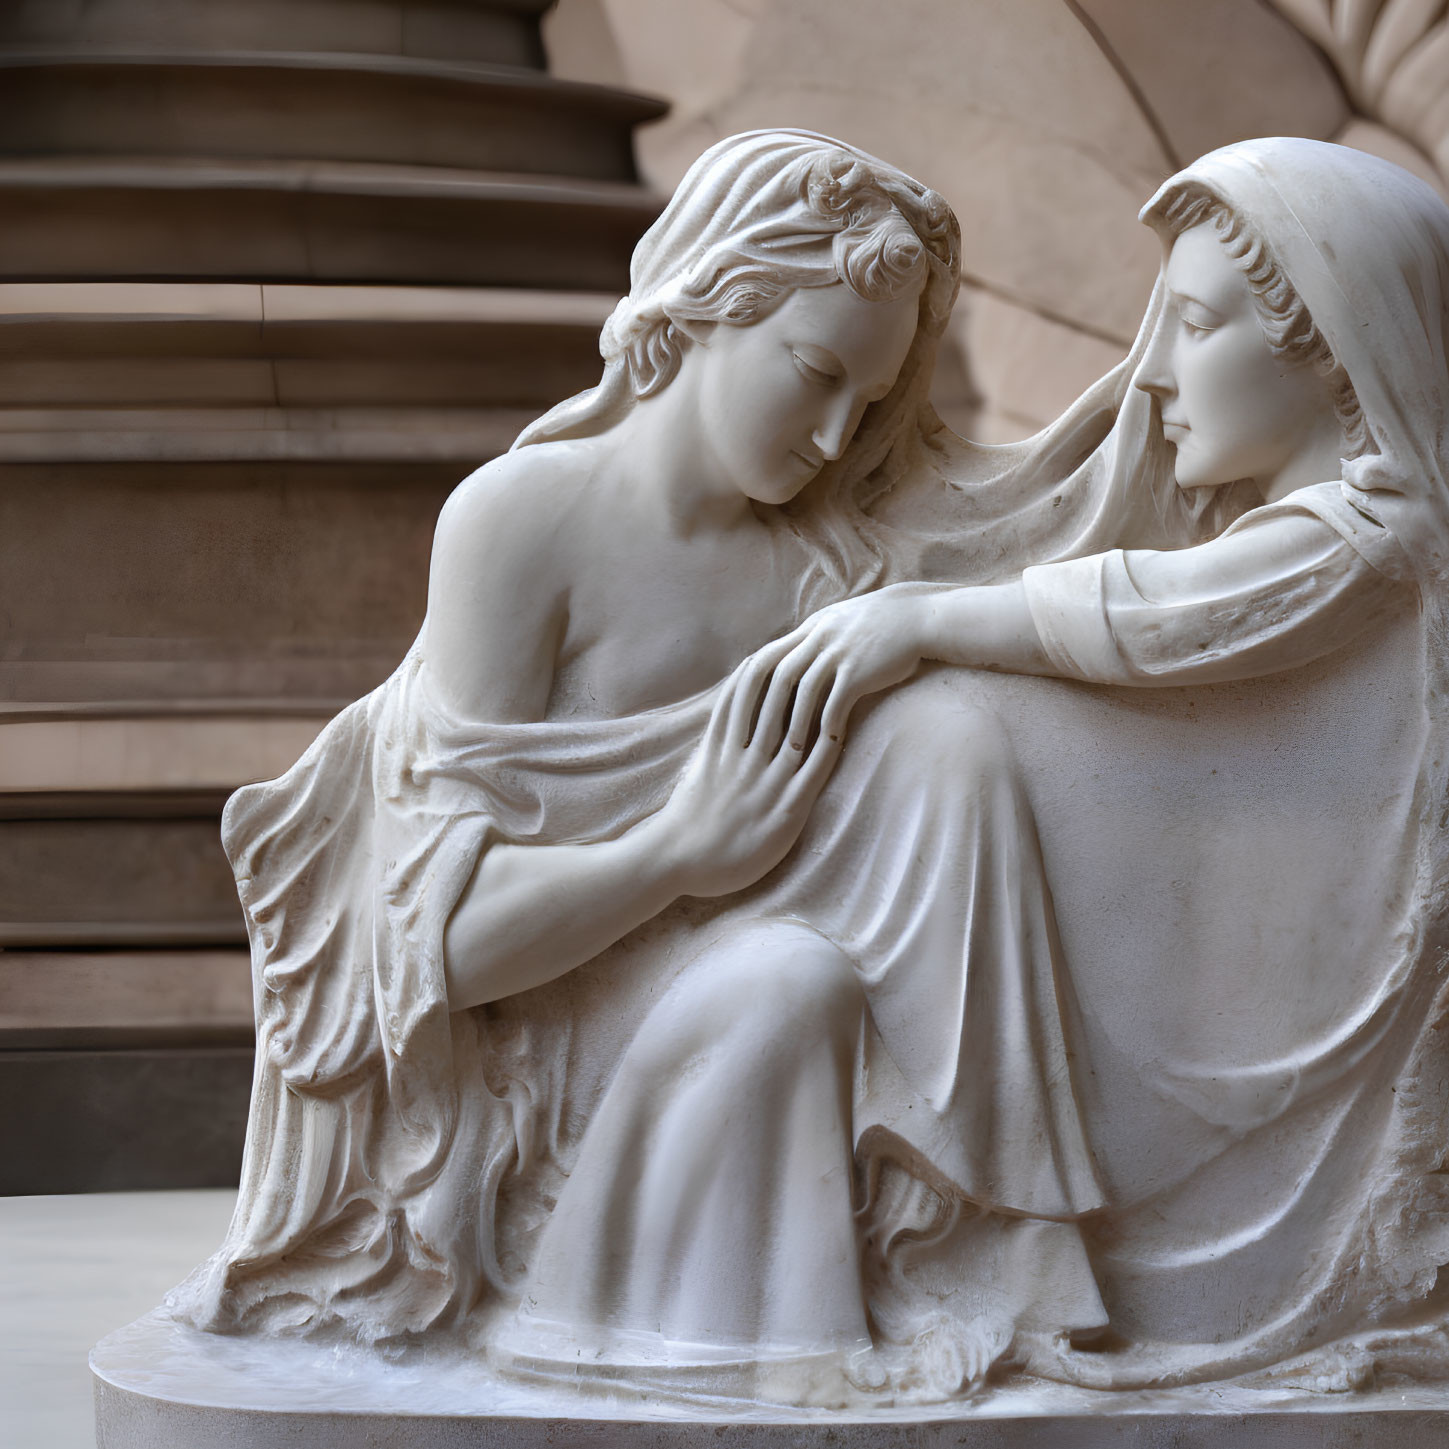 Marble statue of two figures in a tender moment against architectural backdrop